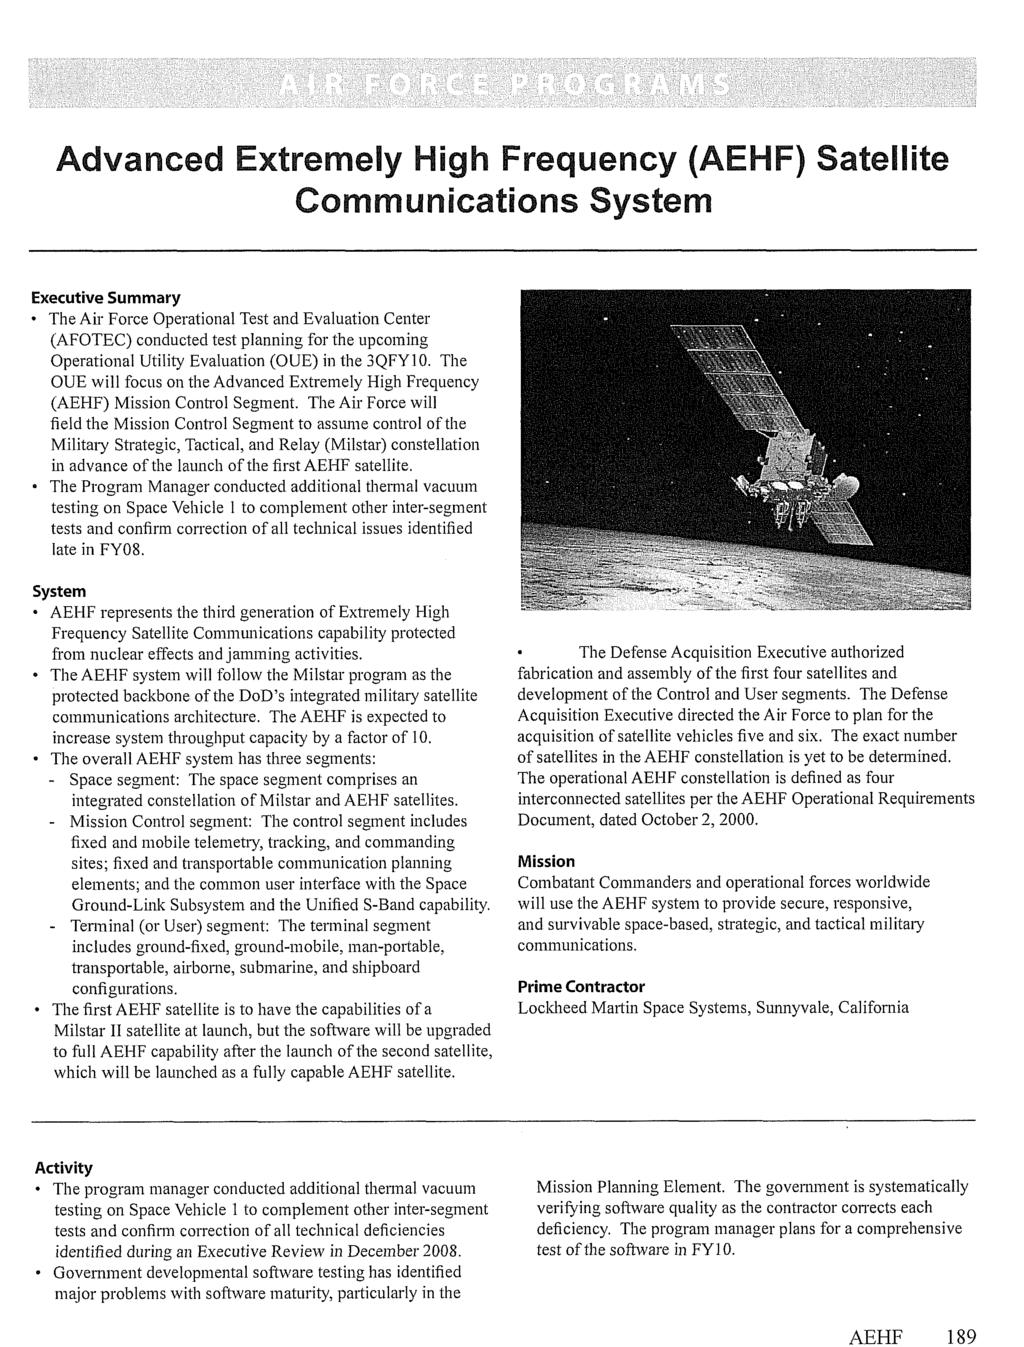 AEHF 189 Advanced Extremely High Frequency (AEHF) Satellite Communications System Executive Summary The Air Force Operational Test and Evaluation Center (AFOTEC) conducted test planning for the